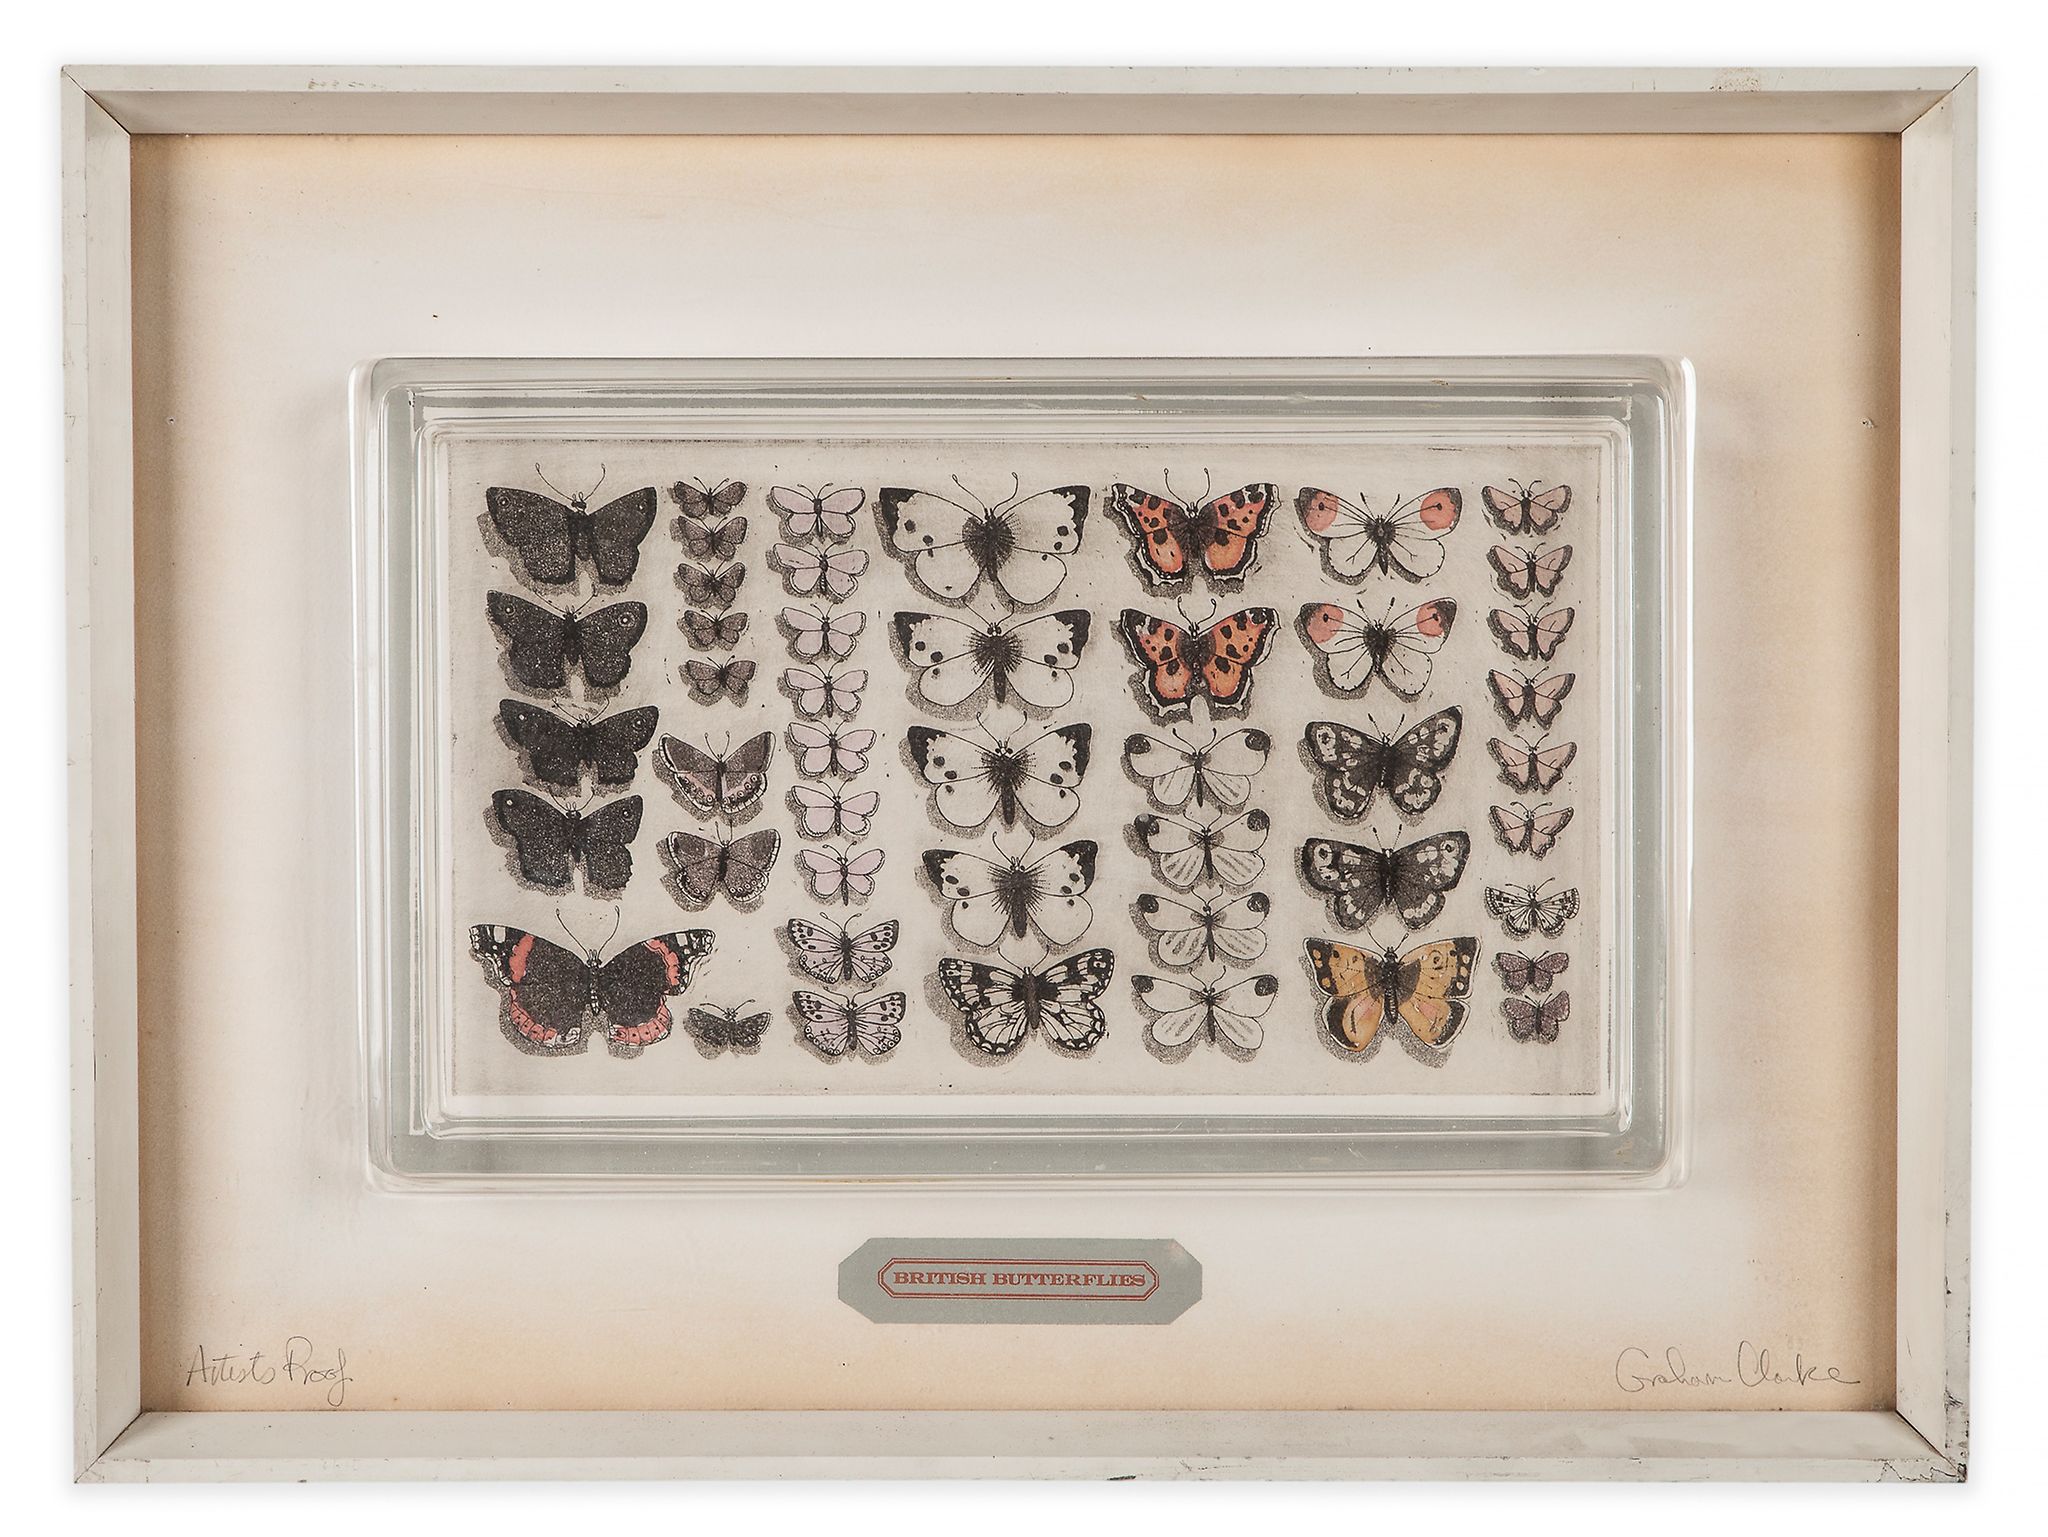 Graham Clarke (b.1941) - British Butterflies etching with hand-colouring, signed in pencil,